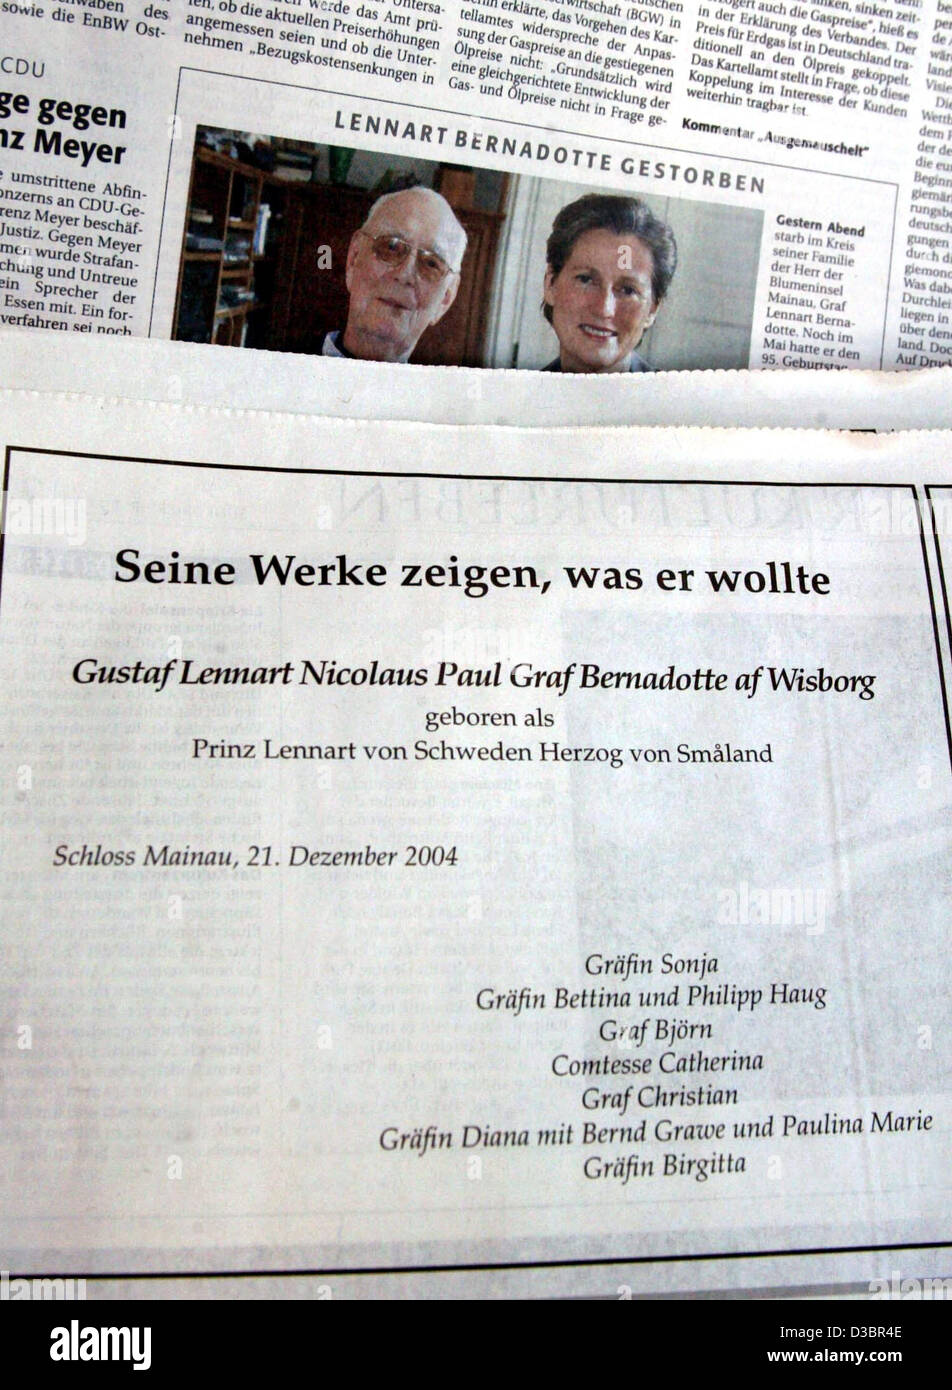 (dpa) - The obituary for Count Lennart Bernadotte can be seen in the Konstanz Suedkurier newspaper on the Island of Mainau in Lake Constance, Germany, 22 December 2004. Count Lennart Bernadotte, lord of the 'flower island' of Mainau in Germany's warm Lake Constance, died on 21 December 2004 at age 9 Stock Photo